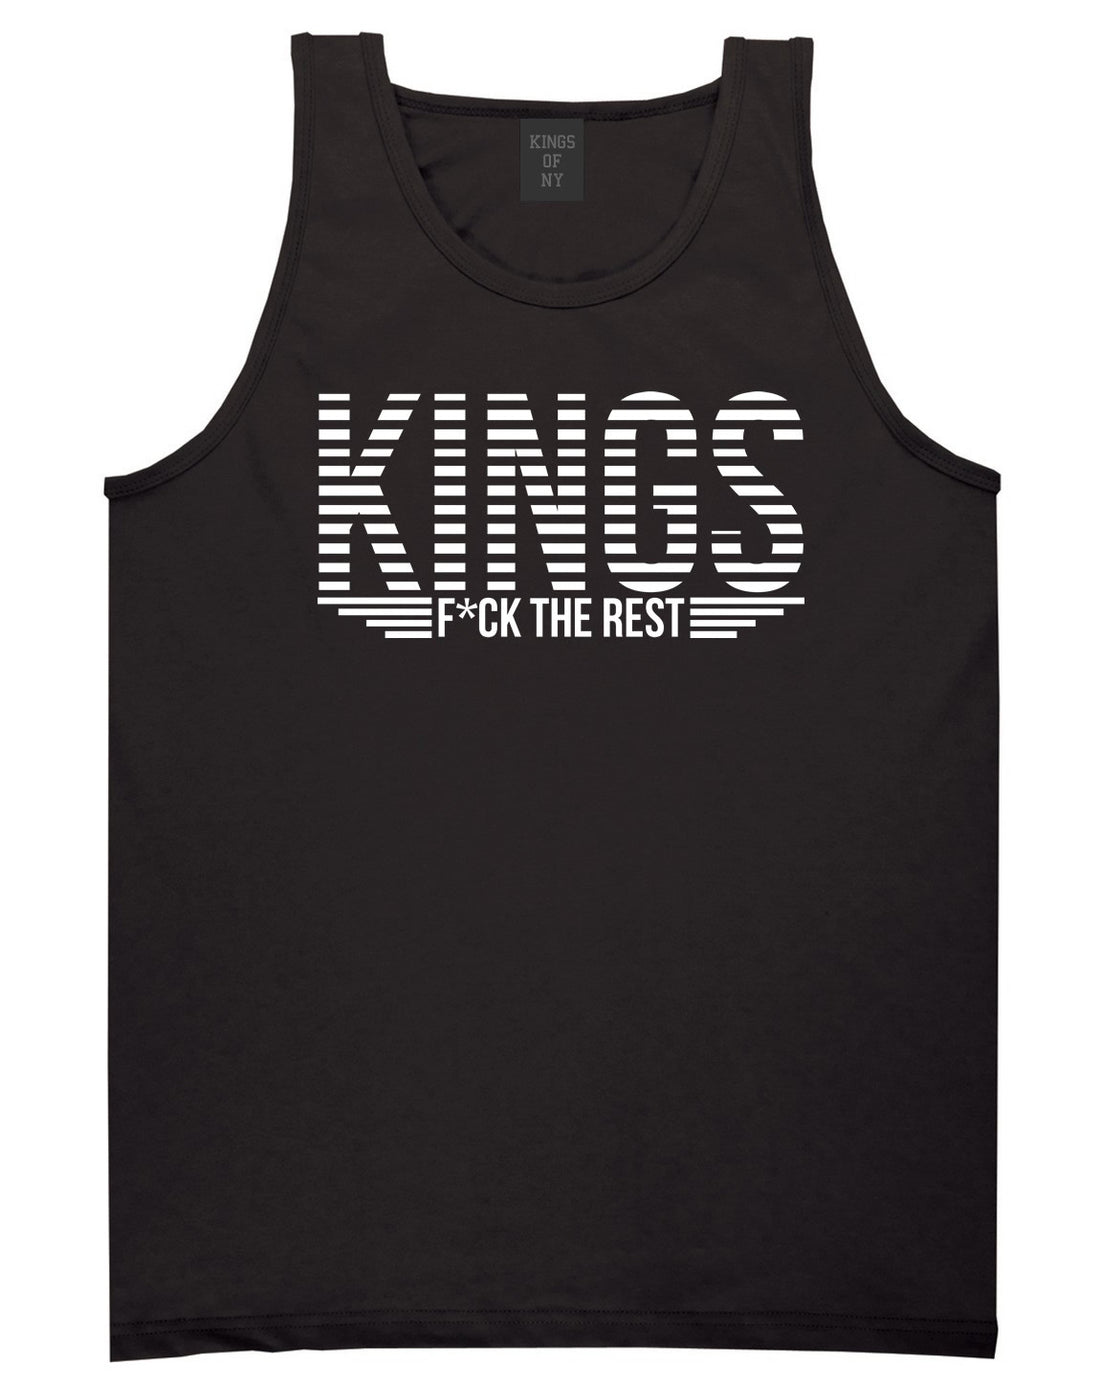 Kings Of NY New York Logo F the Rest Tank Top in Black